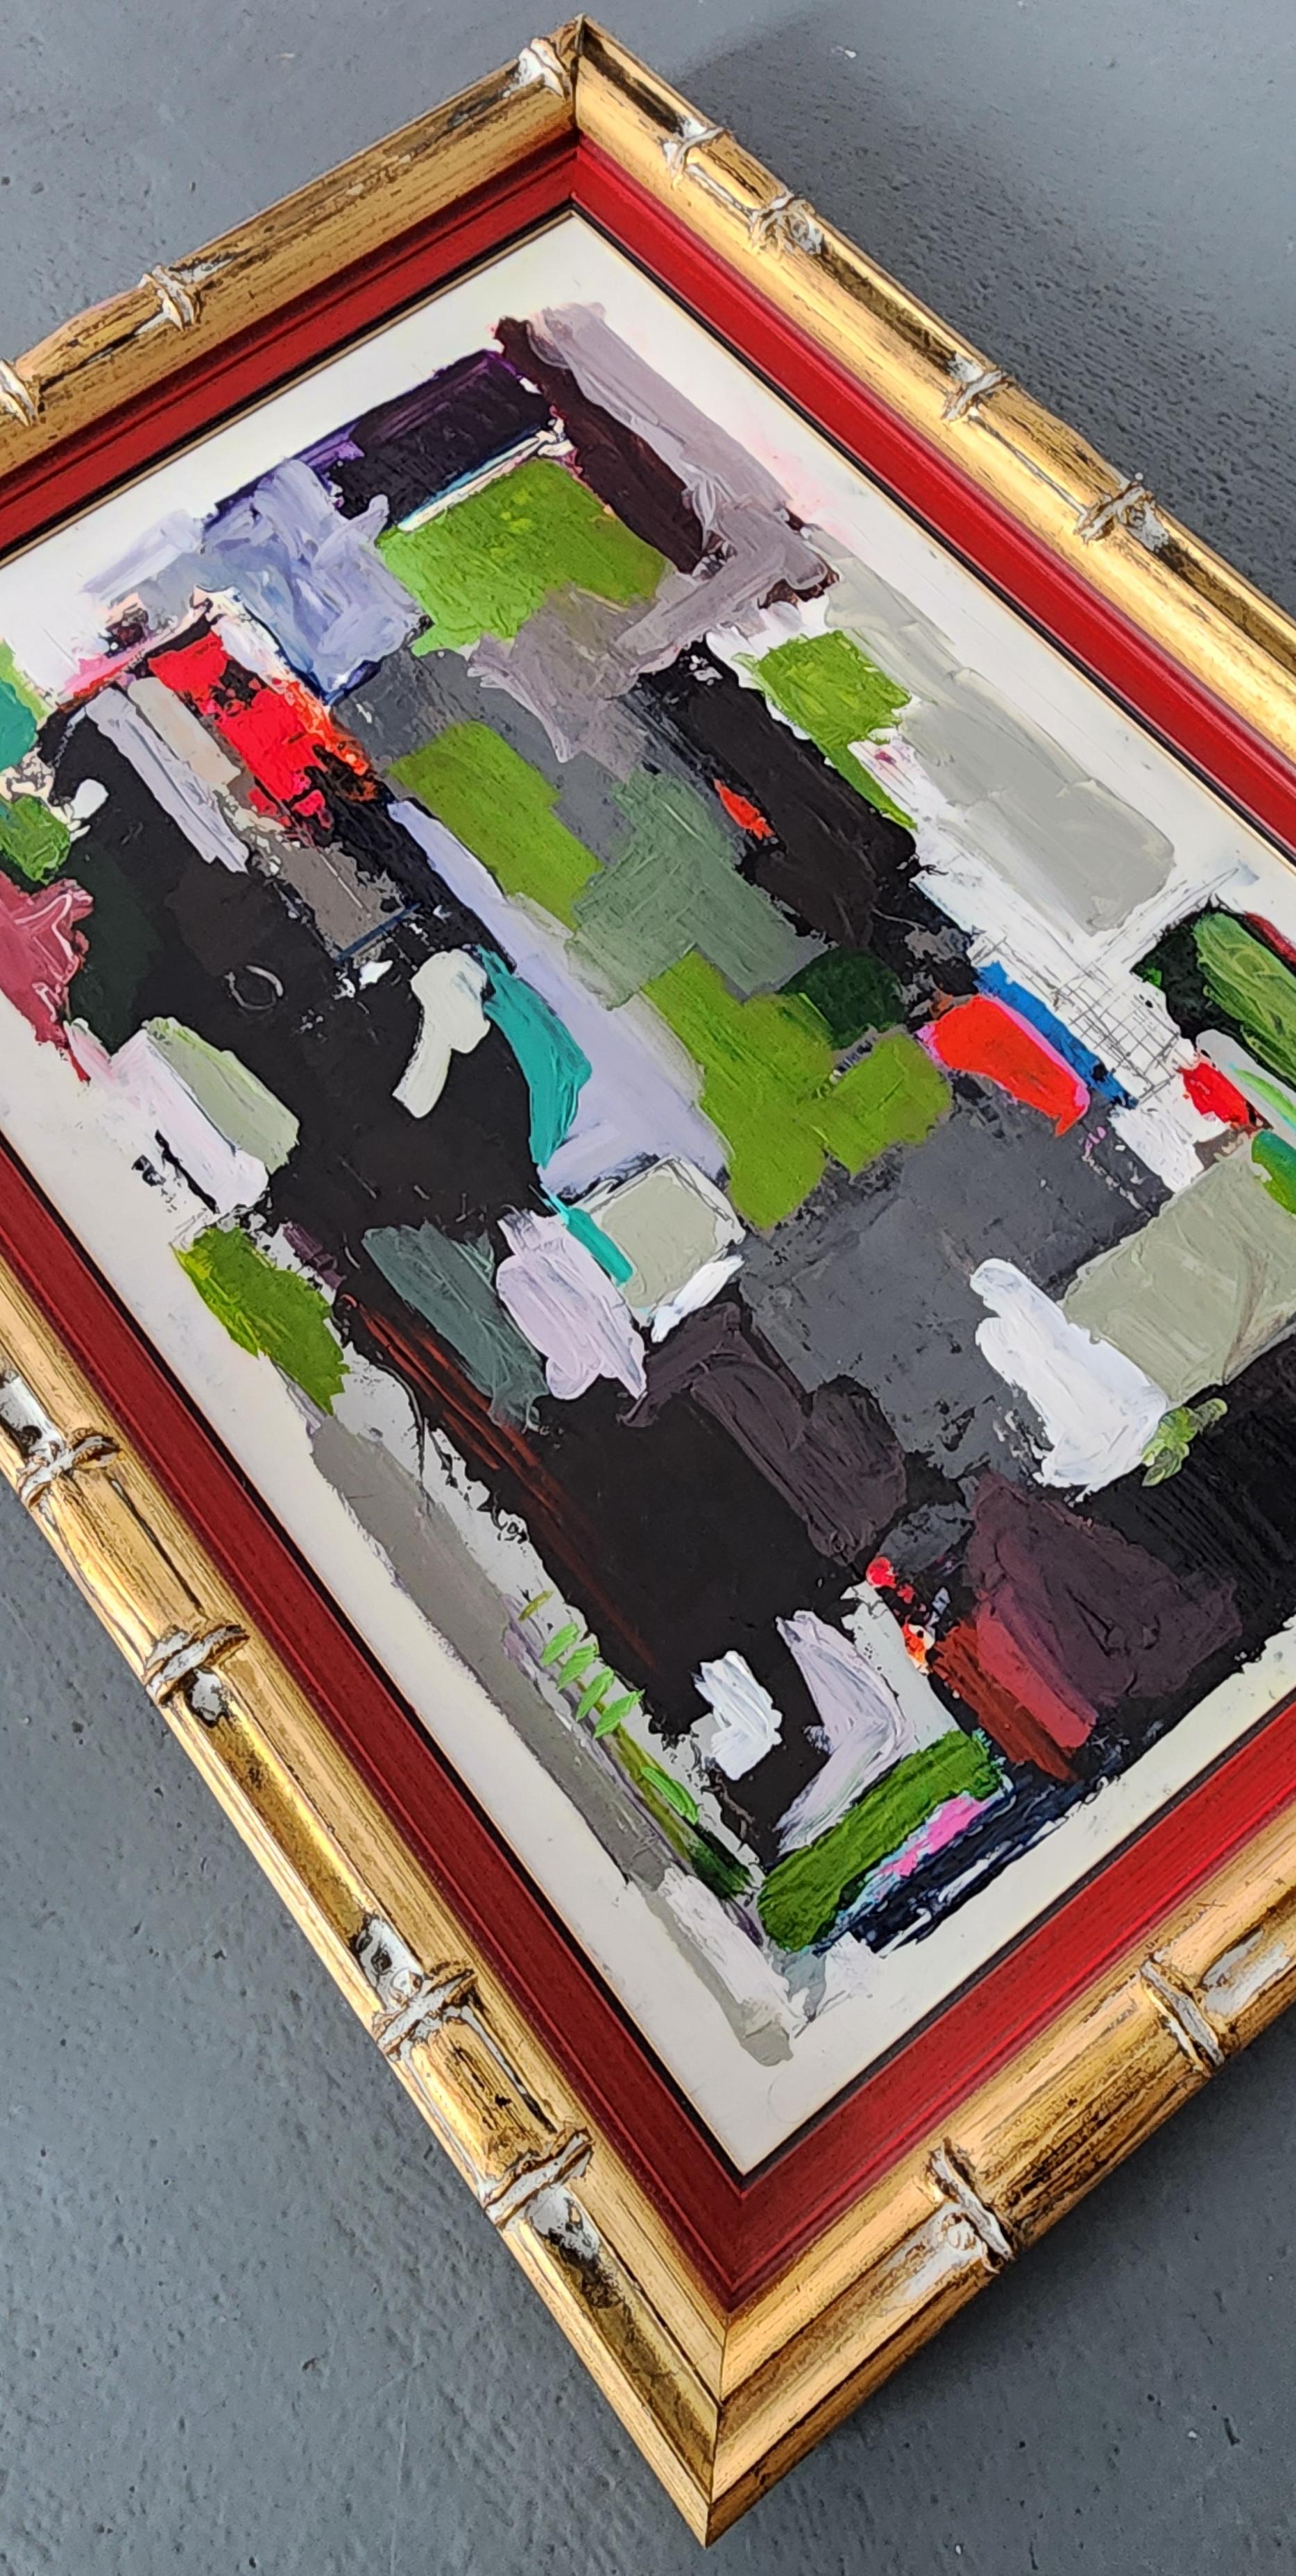 Kelley Carman
Wait On Me (Gestural Abstract, Black, Green, Red, Gray)
Acrylic on Birch Panel 
Year: 2024
Size: 17.5 x 11.5 inches
Framed Size: 21 x 15 inches
Signed and titled
COA provided 

*Framed in a gold leaf wood frame - ready to hang

Tags: